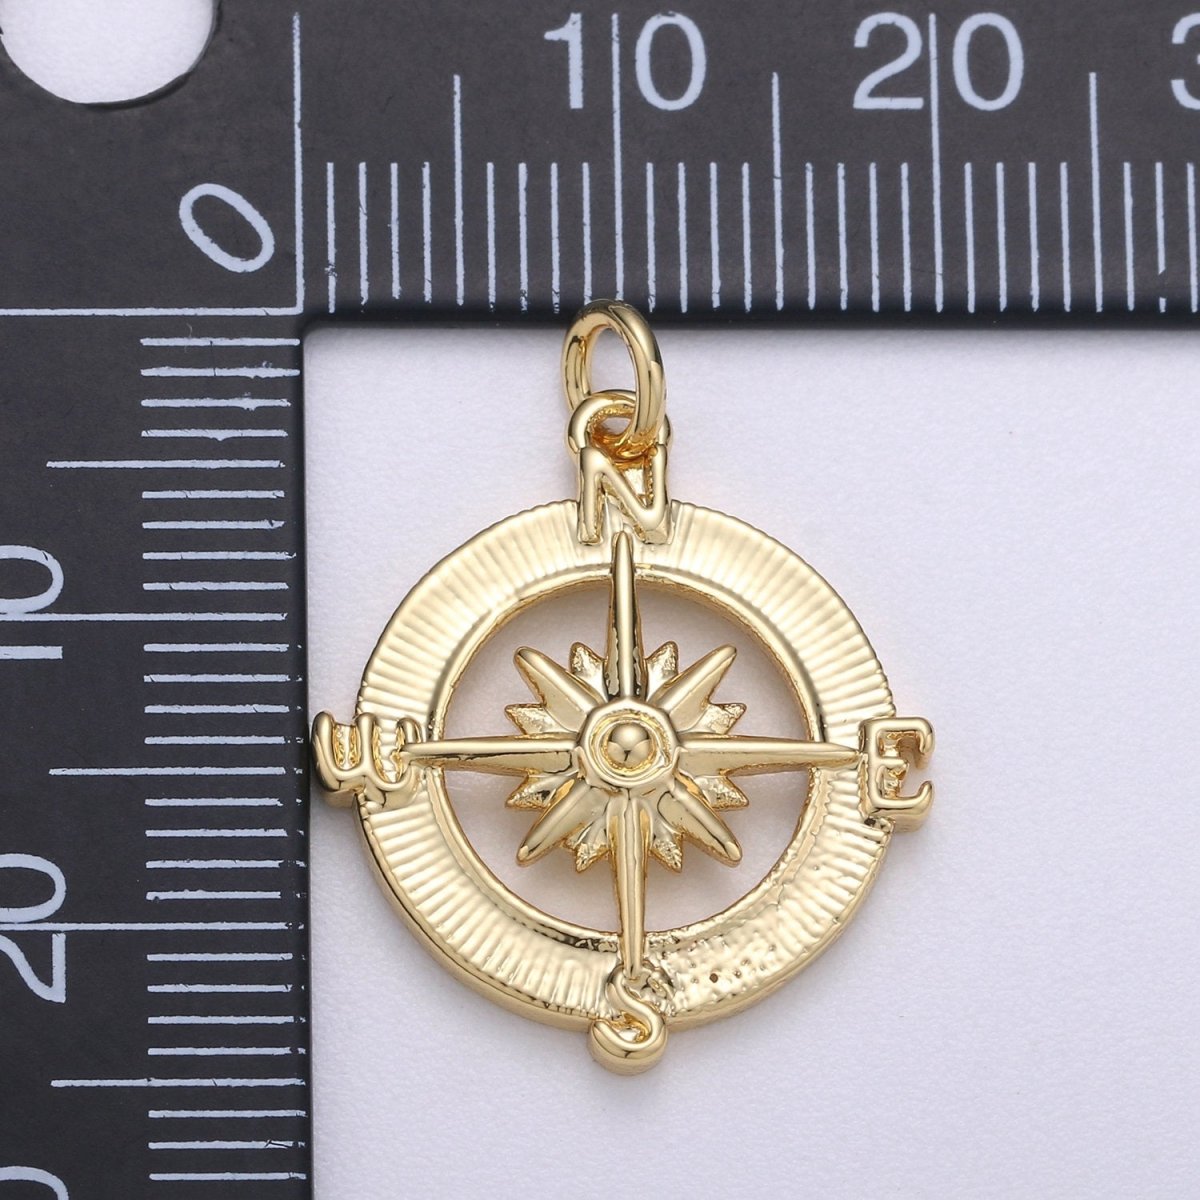 14k Gold Filled Dainty Compass Charm, Gold Compass Pendant, North Star Charm, Travel Charms, Nautical Charms for Bracelet Earring Necklace C-466 - DLUXCA